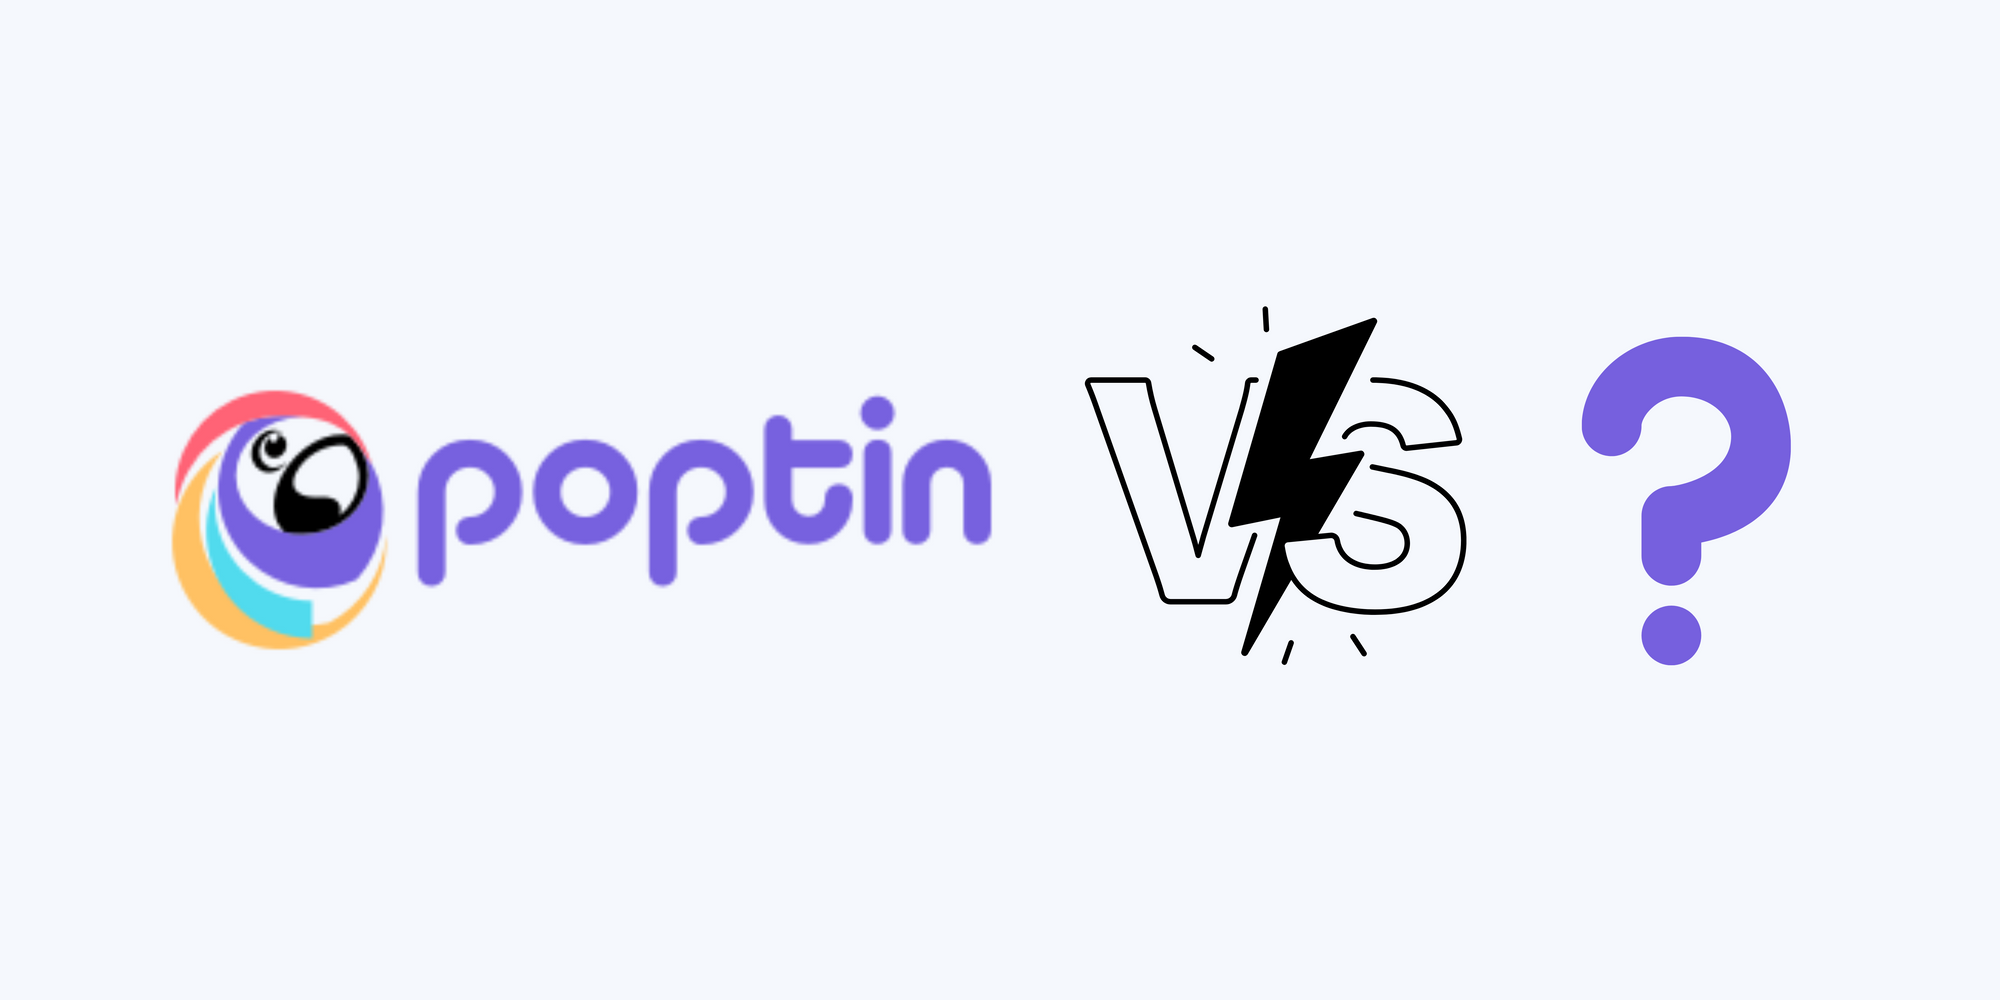 Poptin icon, versus symbol and a question mark to mention the alternatives on blue background